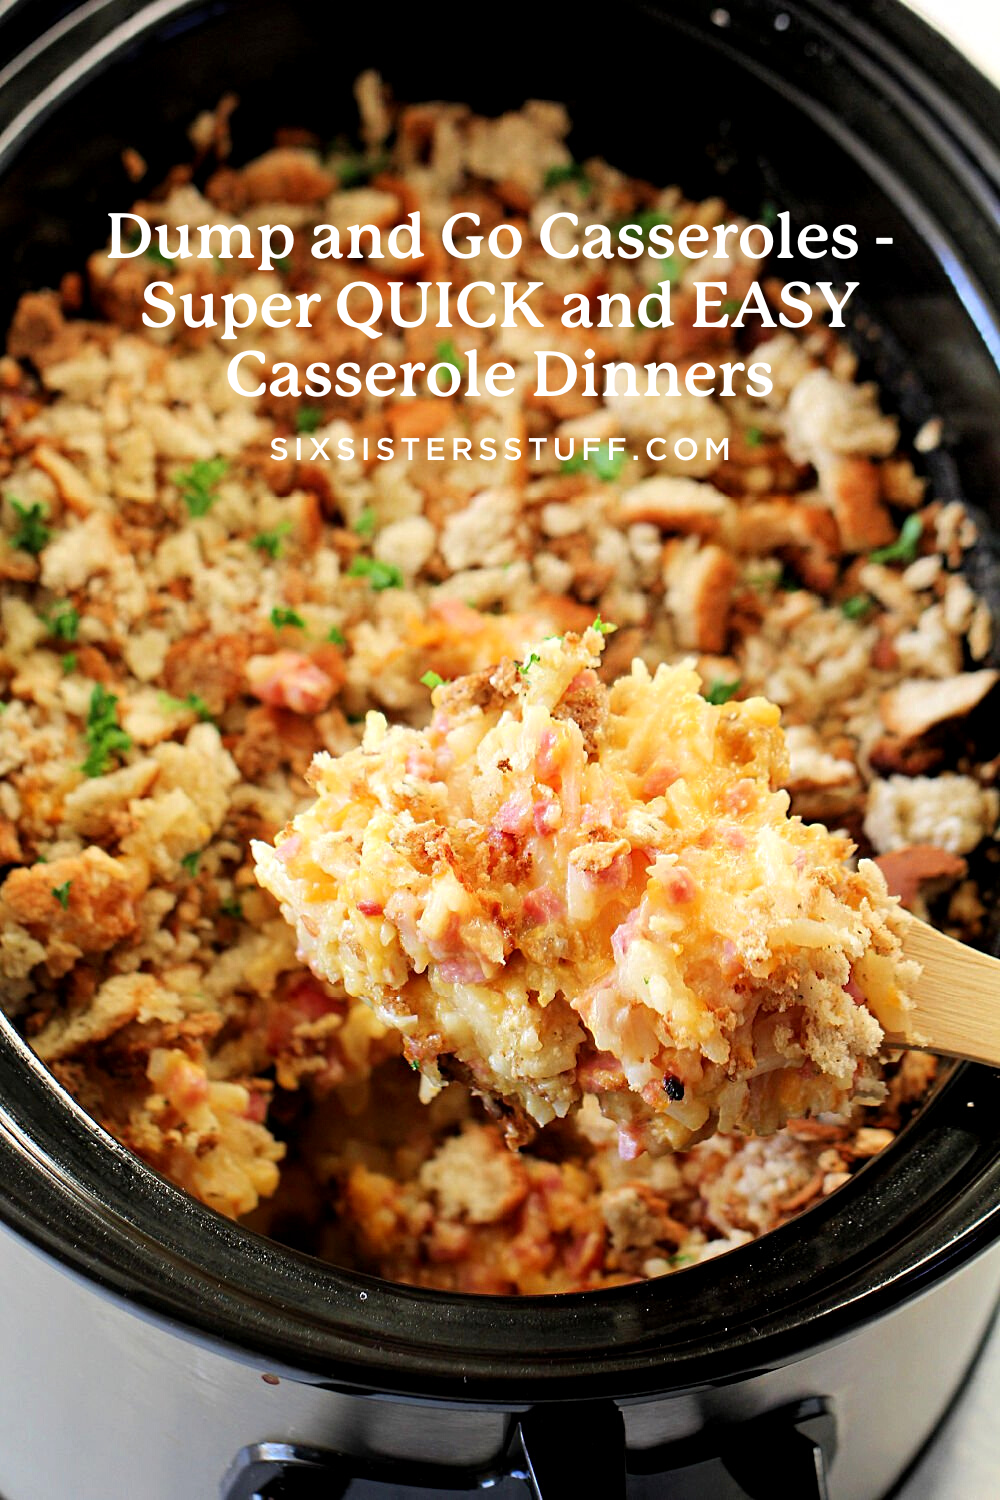 Dump and Go Casseroles – Super QUICK and EASY Casserole Dinners